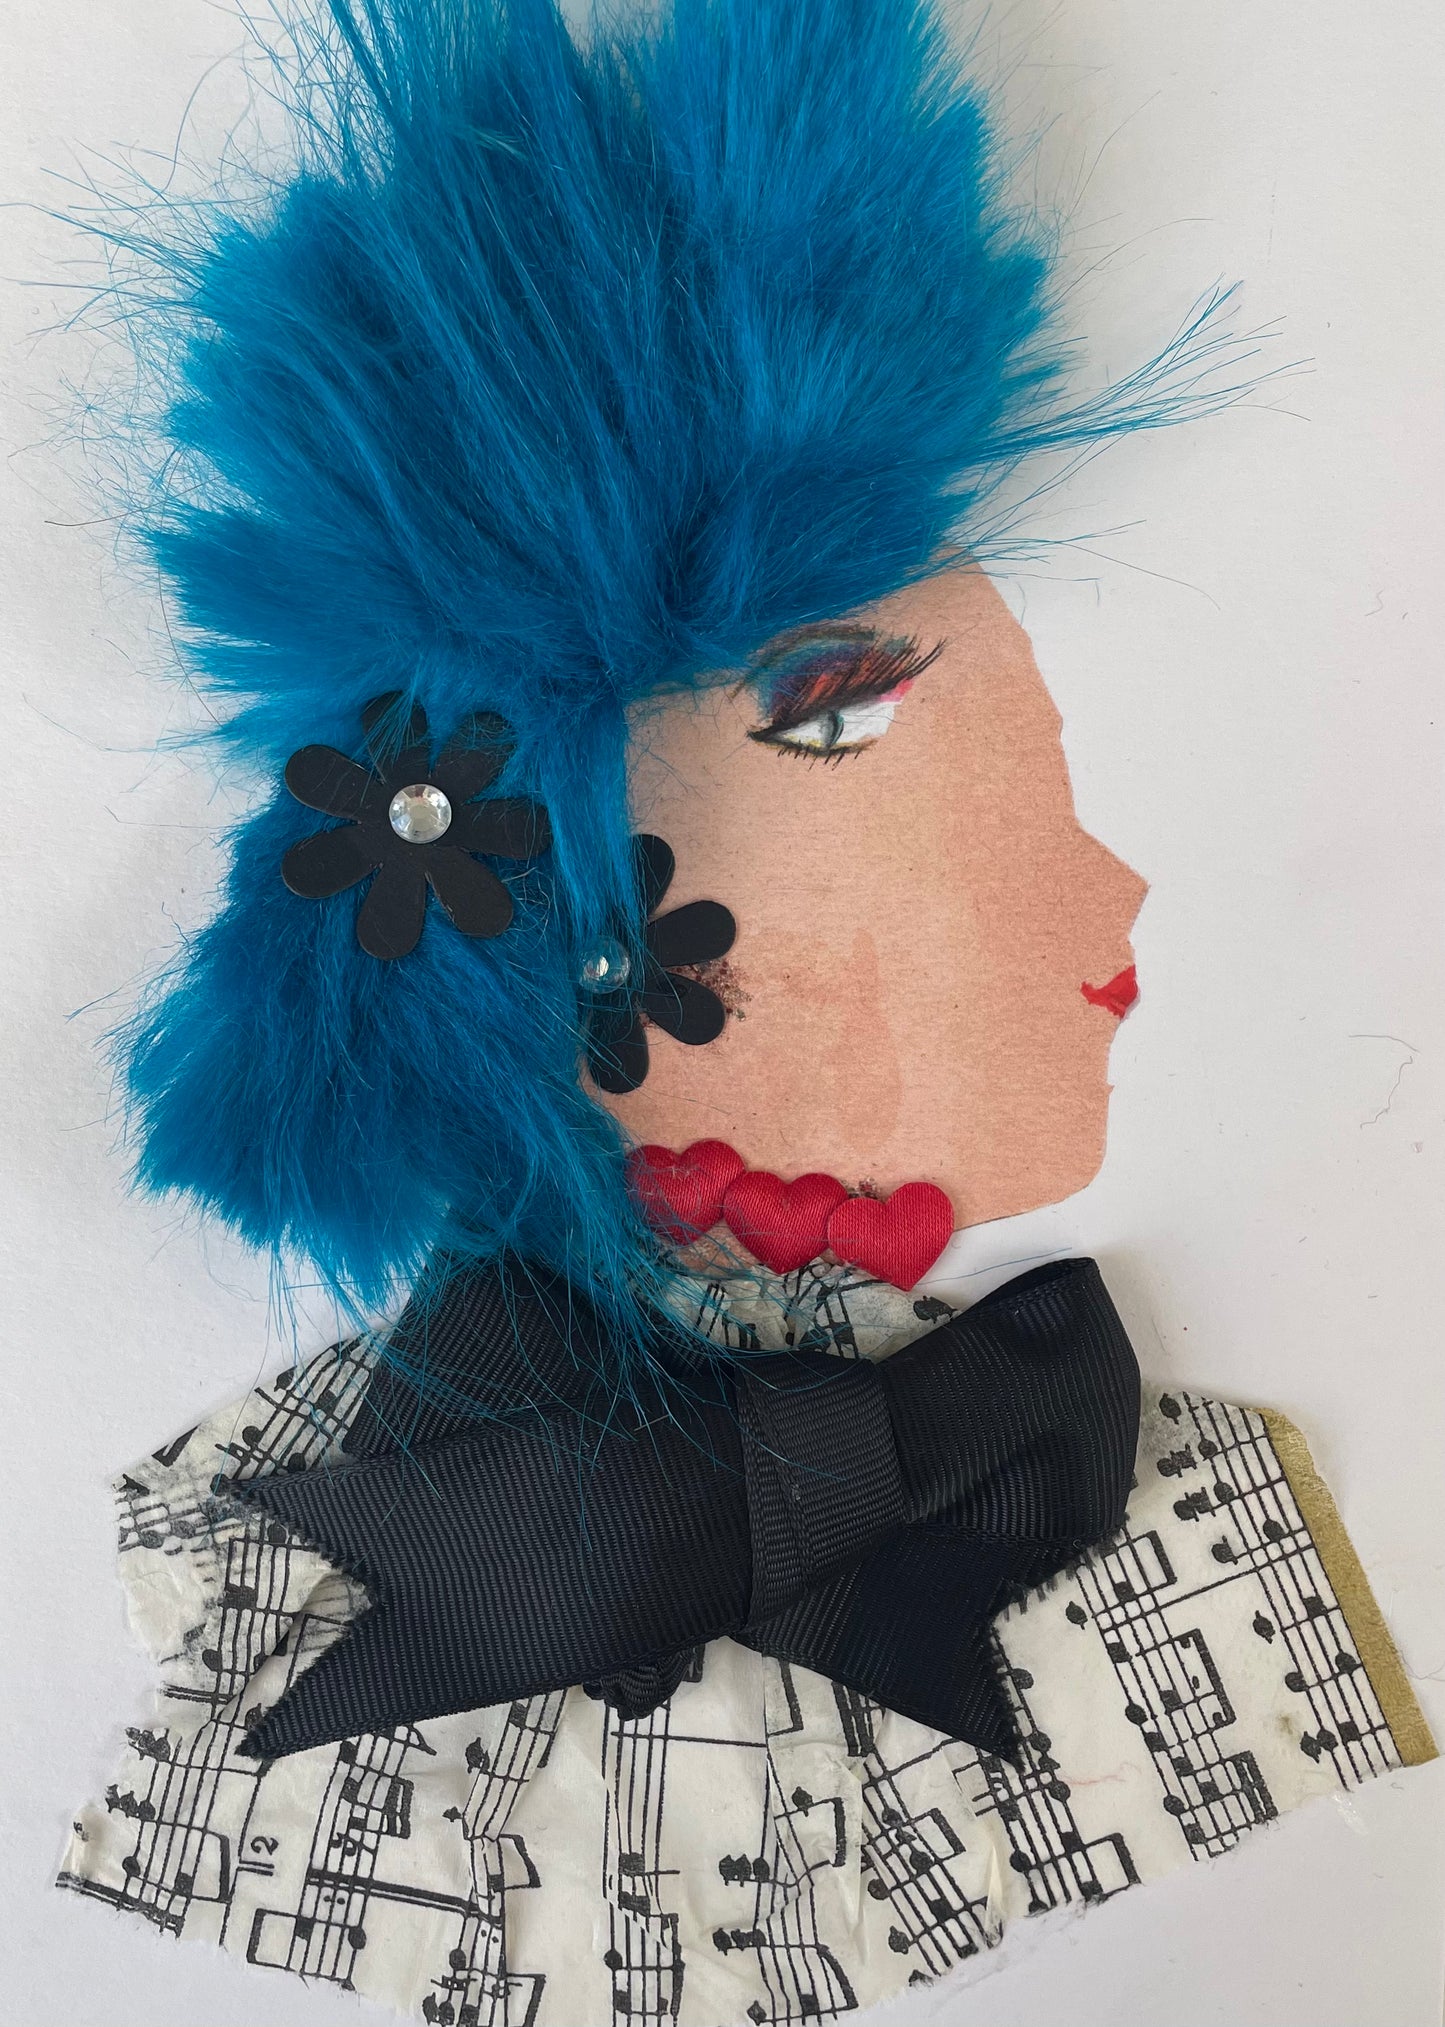 I designed this card of a woman named Kensington Katherine. She has a white skin tone and vibrant blue hair. In her hair there are two black flowers. She wears a music print blouse with a black bow in the middle. She wears a red heart necklace. 